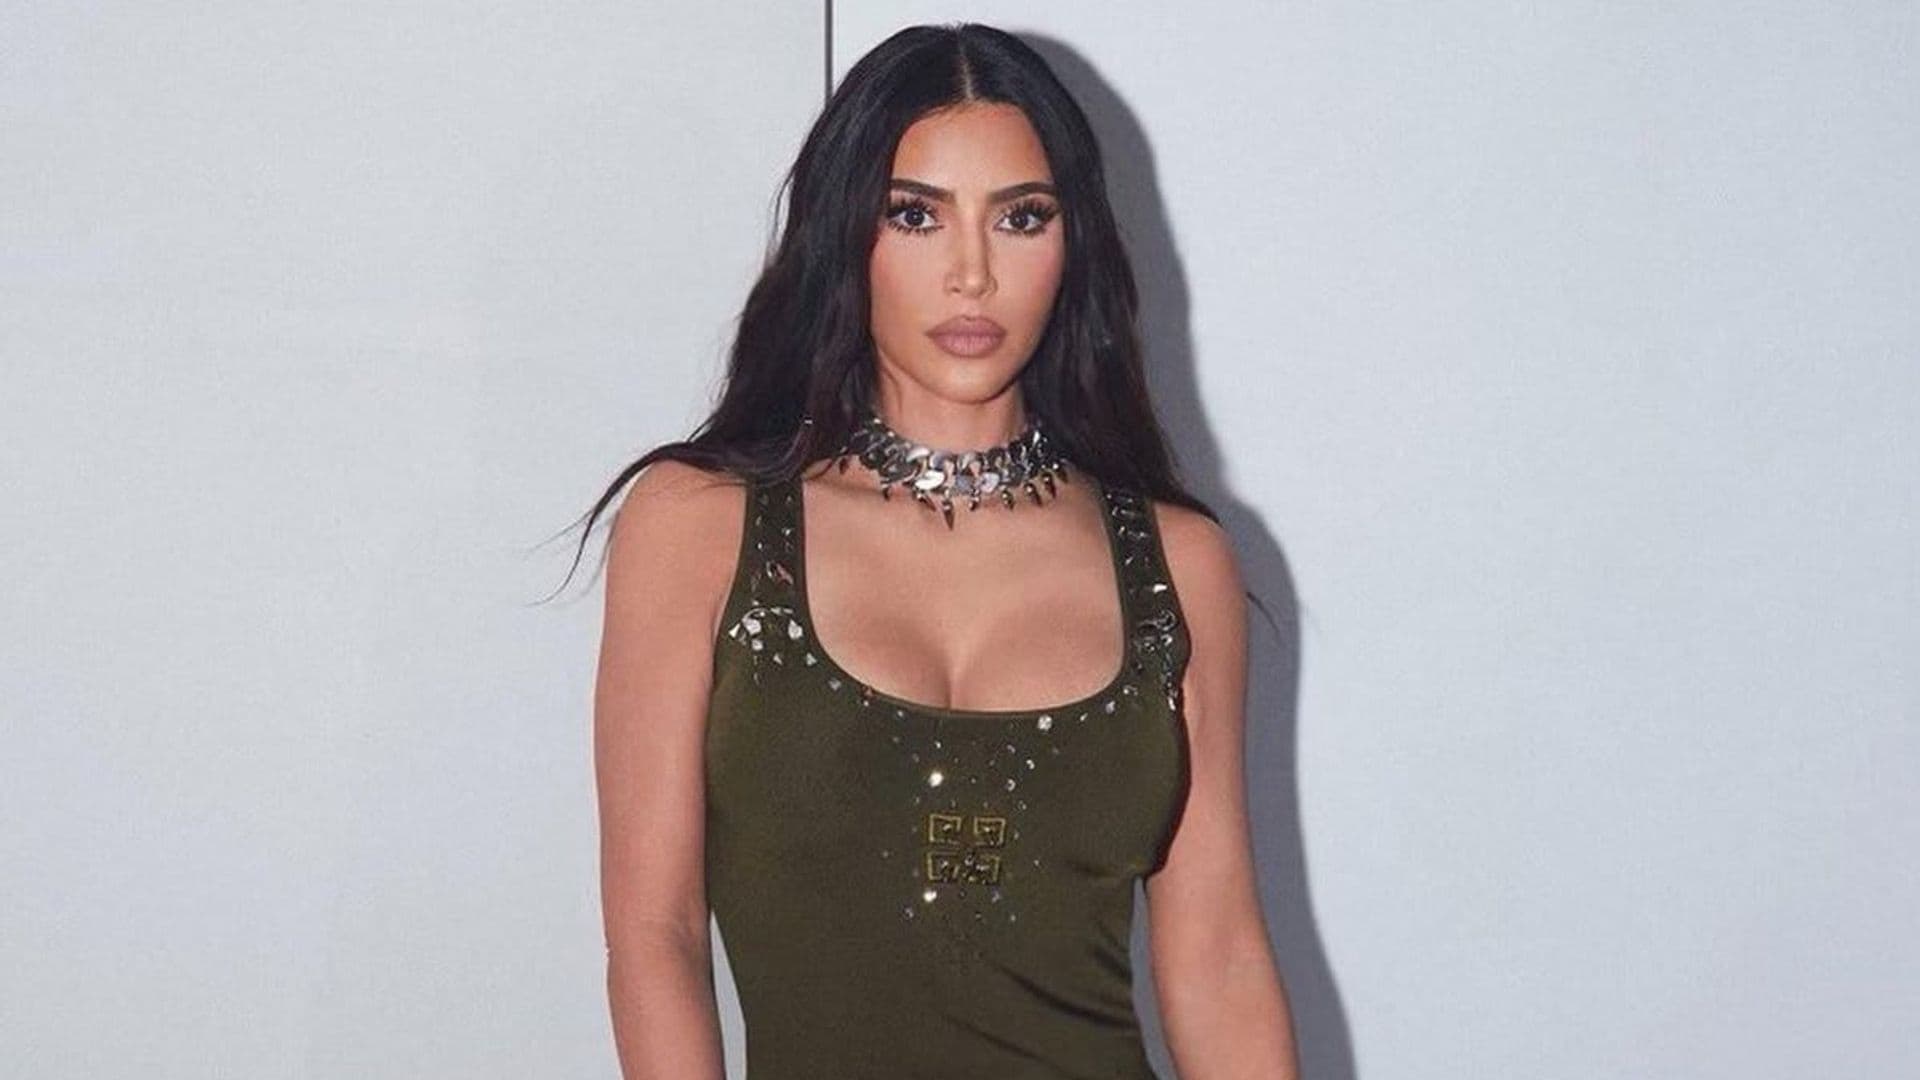 Kim Kardashian believes there will be another billionaire in her famous family